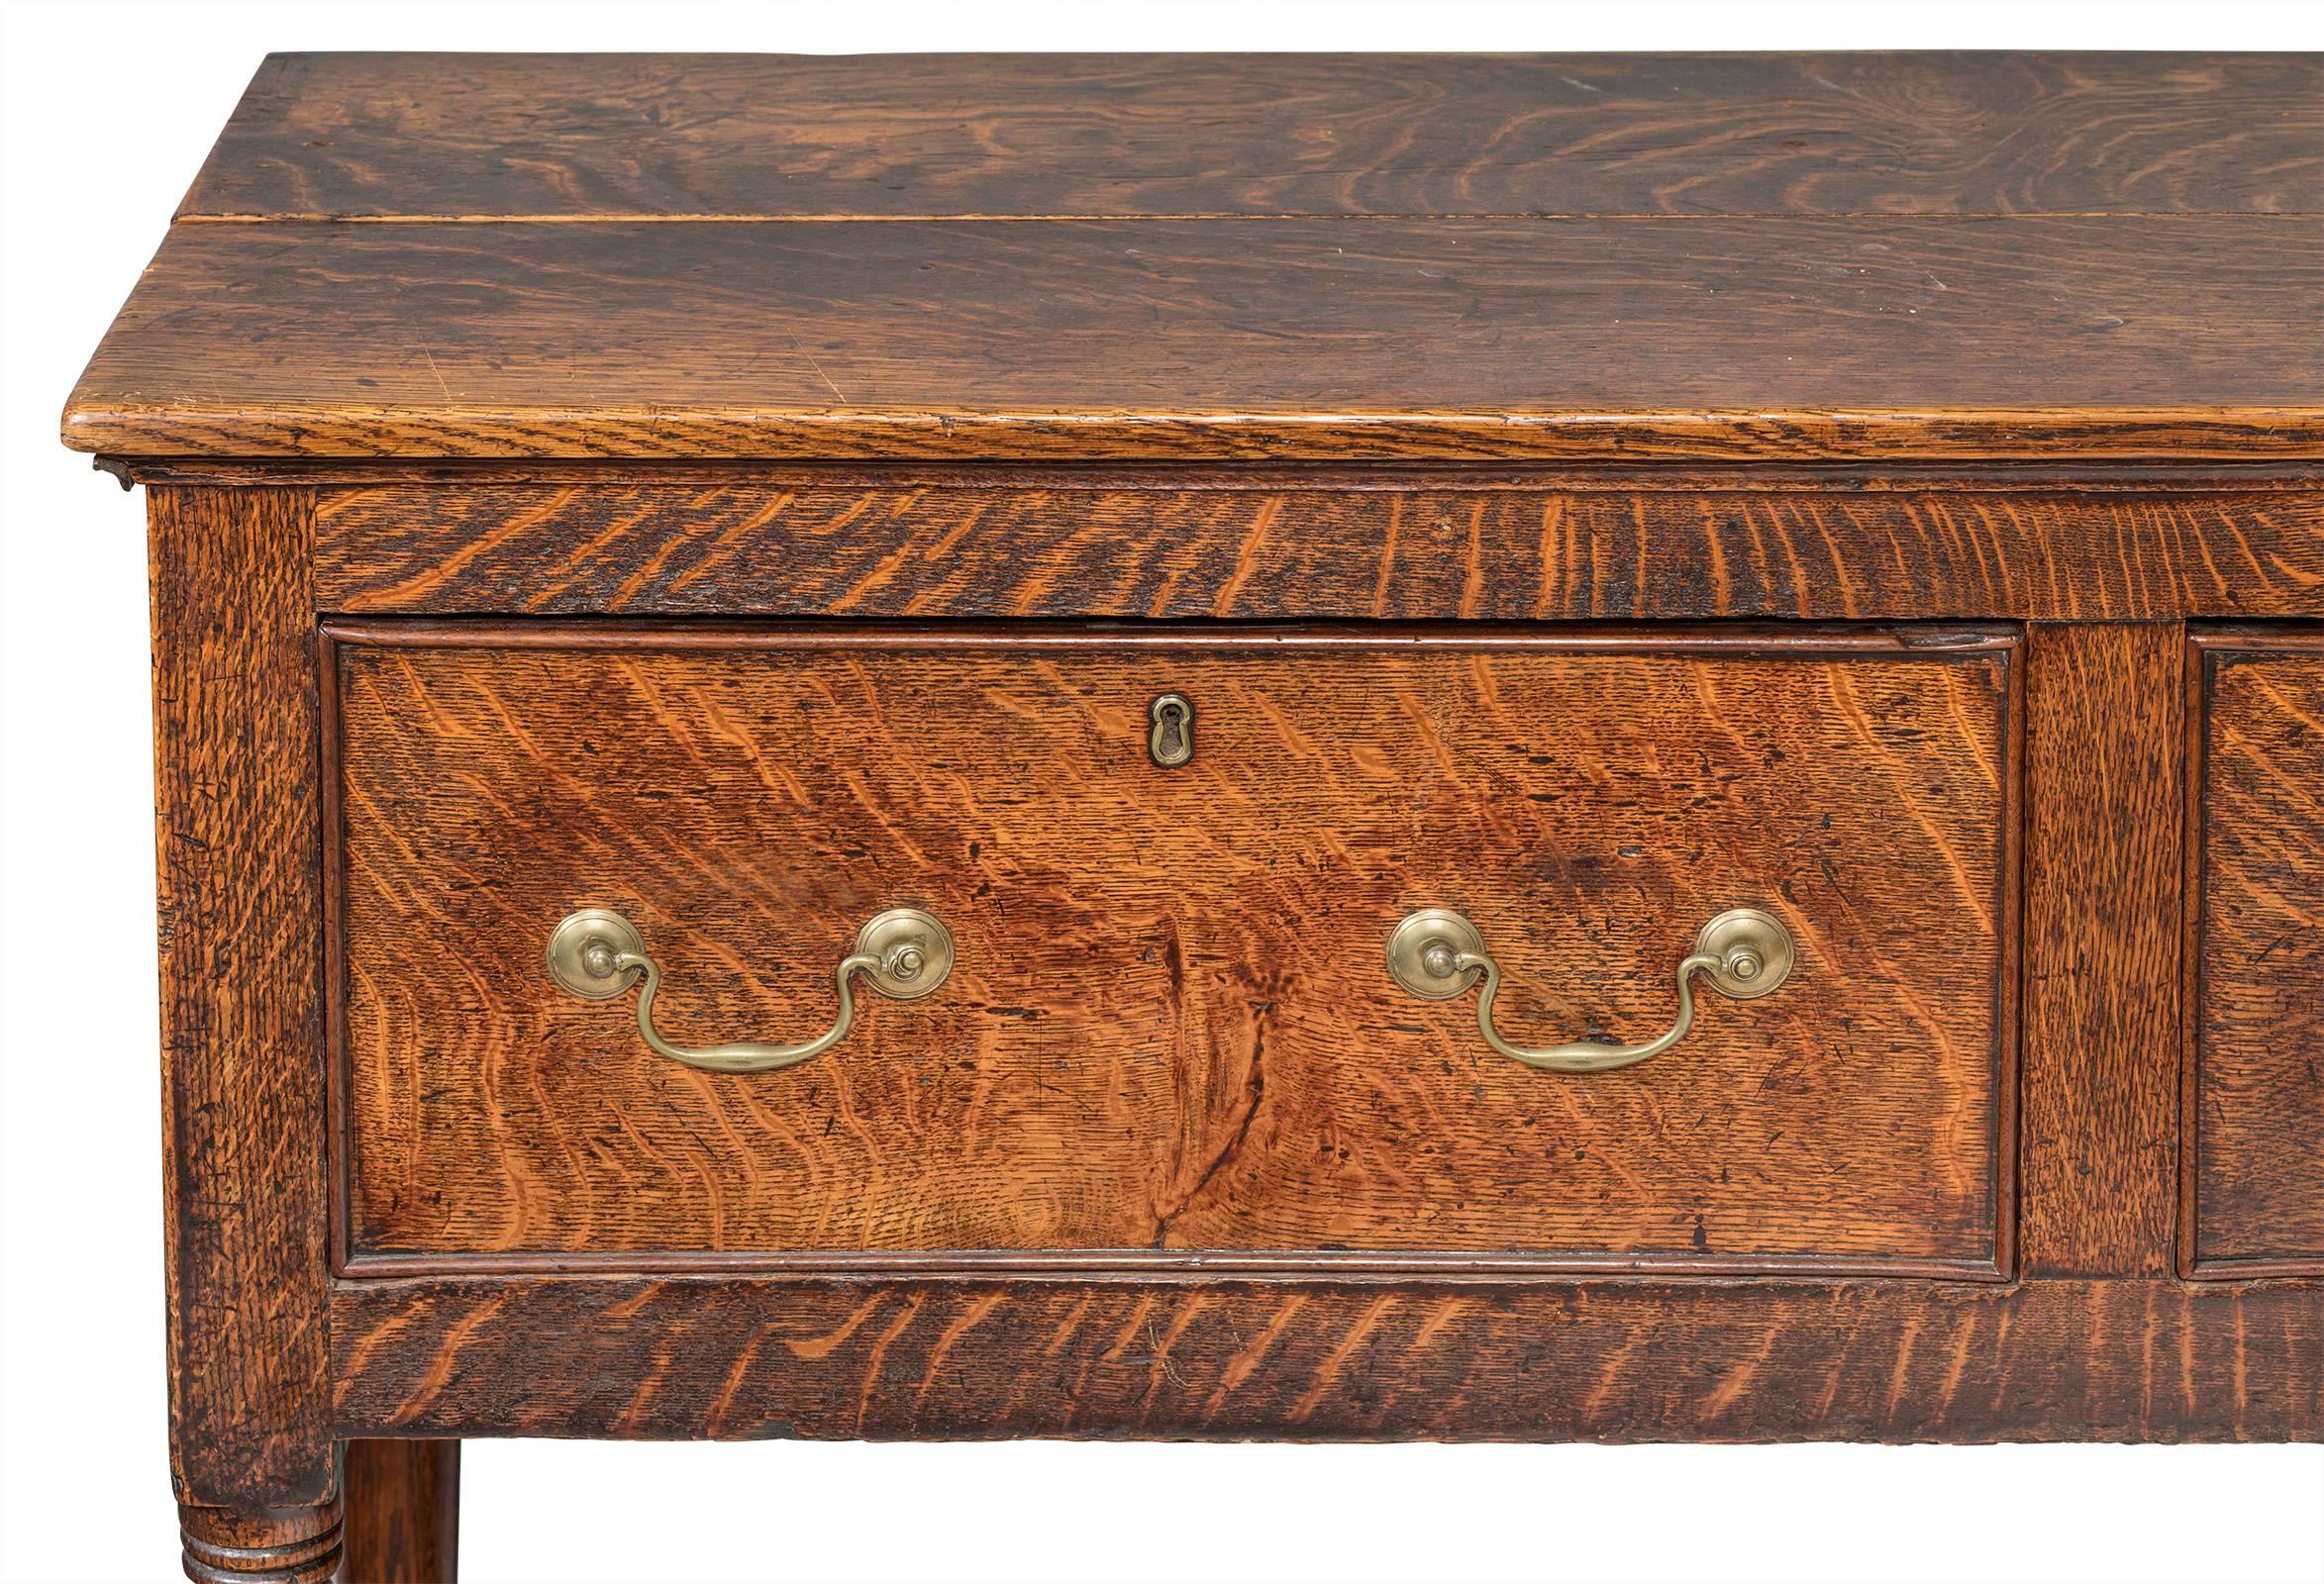 19th century English oak server. Very handsome piece, wonderful original patinated finish. Three-drawer buffet with double brass handles. Middle drawer is lined with silver tarnish felt. Simple turned legs. Excellent sturdy condition.